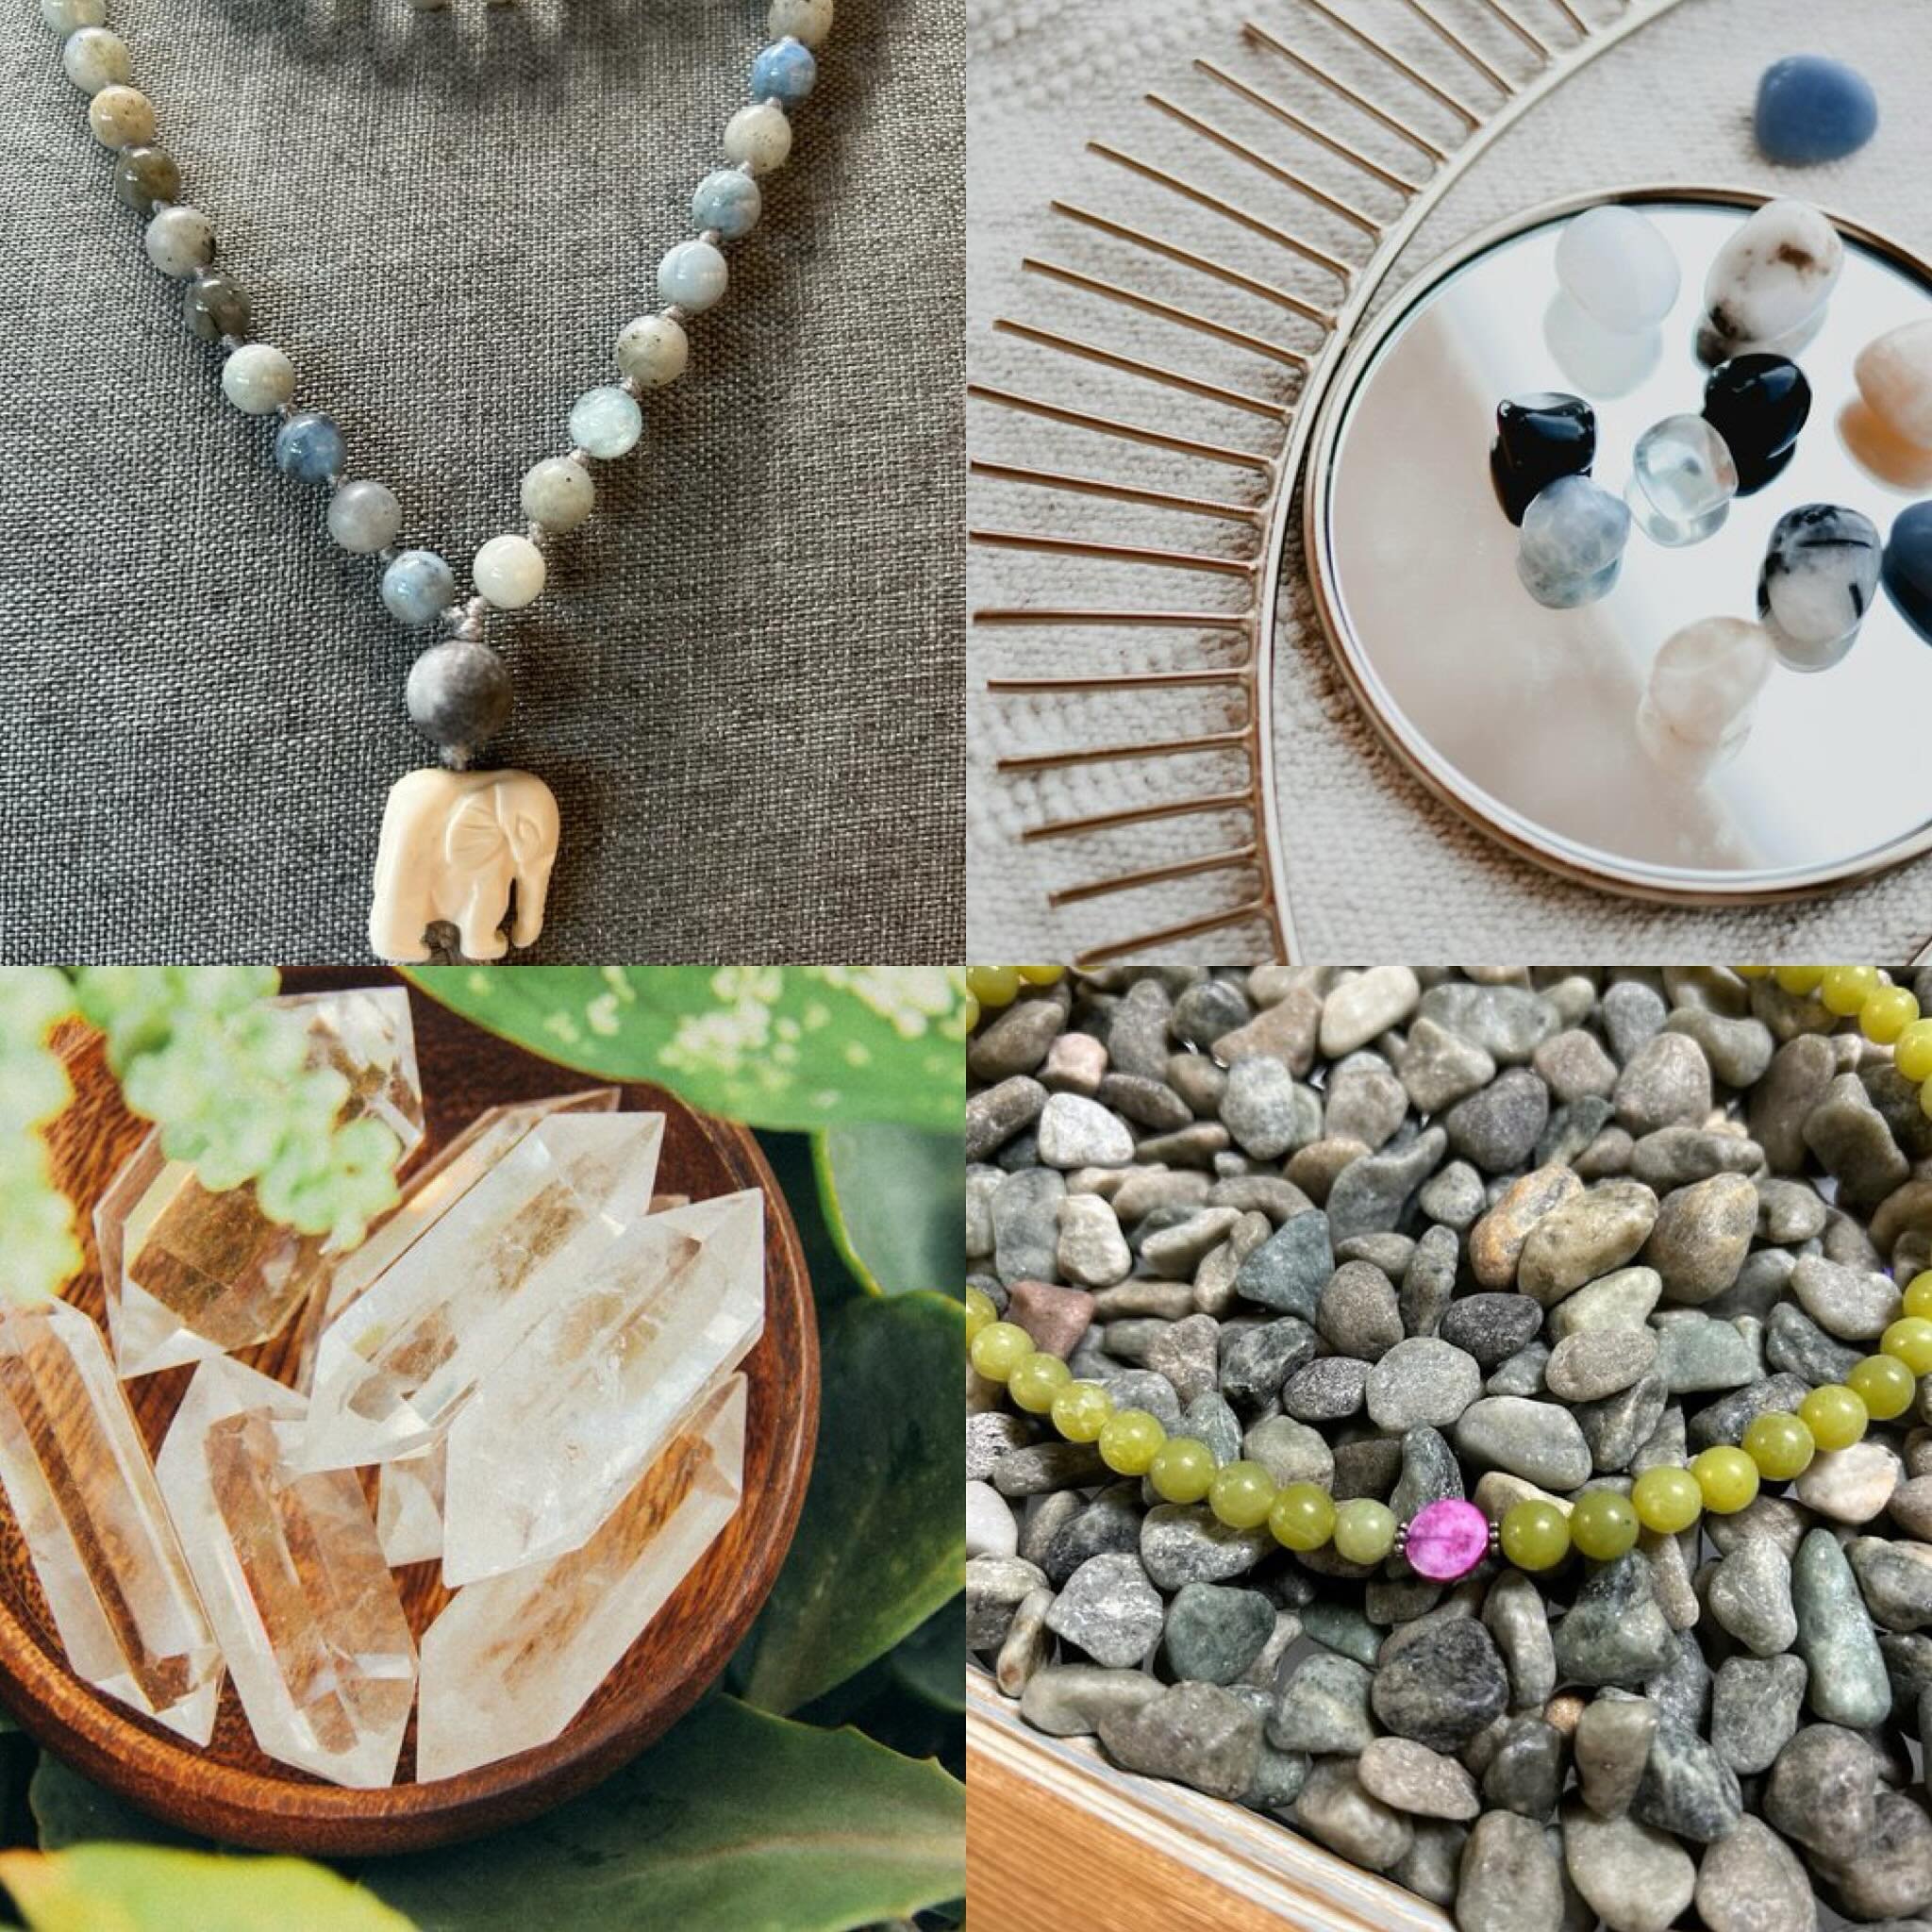 Join us tomorrow (Wednesday)night from 7-9pm for a very special free workshop: &ldquo;Crystal Clarity: Healing Wisdom and Artistry&rdquo;
Taught by artists, Emily Lamberty, Brooke Aston, and Candice Lindsay

Step into the serene world of crystals and